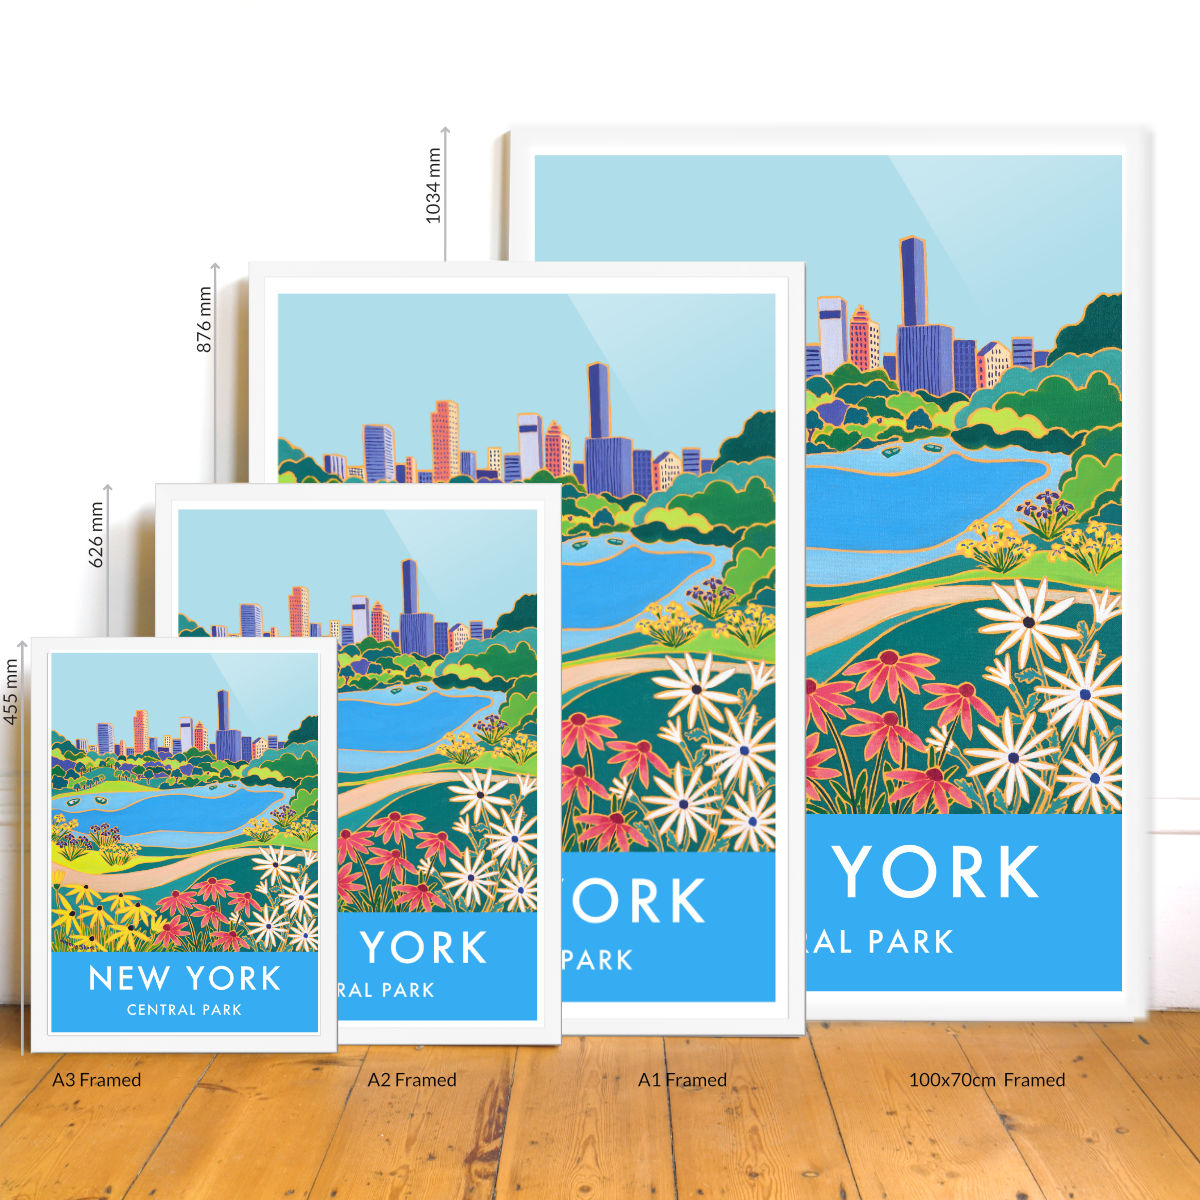 New York City Prints. Central Park. Art Posters of New York by Joanne Short. Wall Art Gallery NY